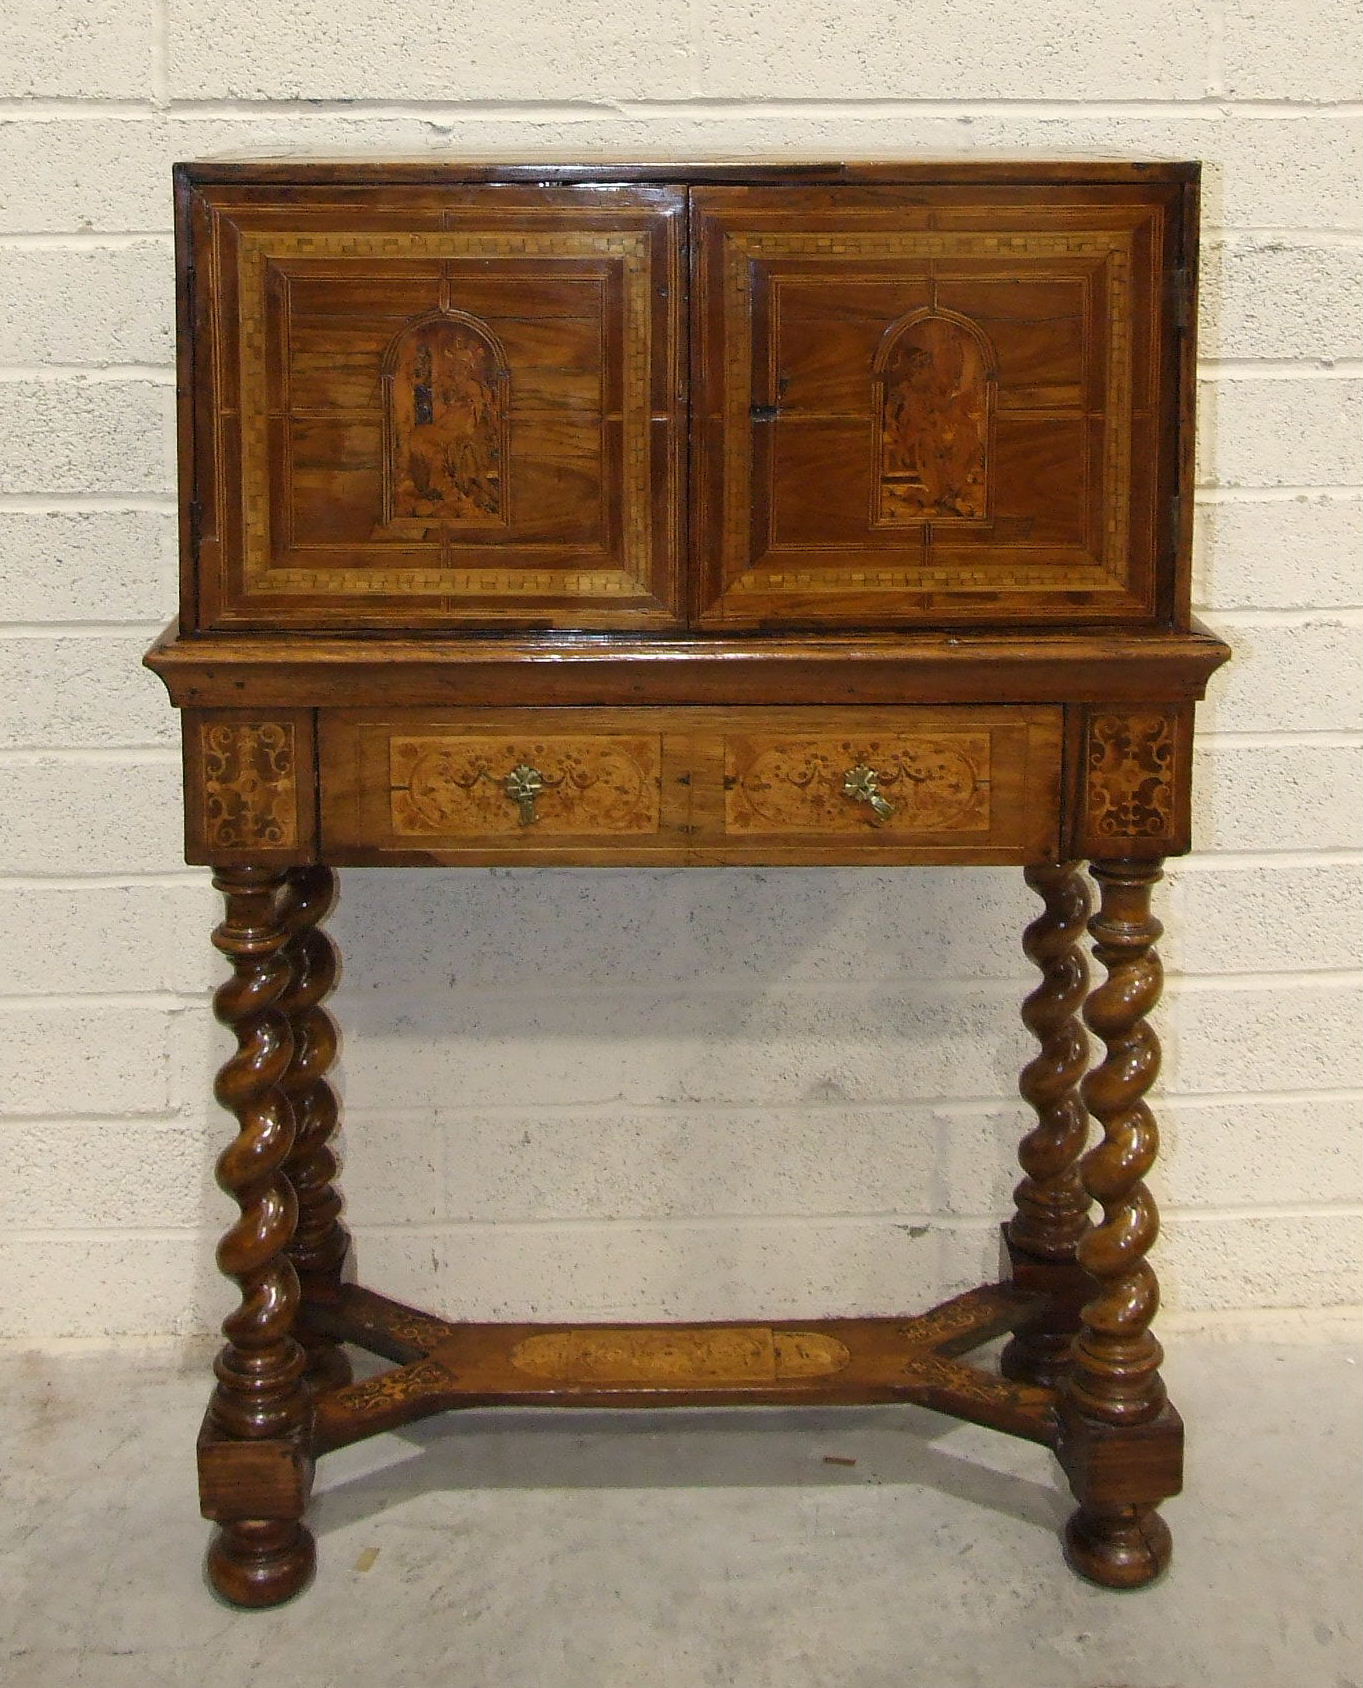 A mainly 18th-century-style Continental table cabinet with overall marquetry and parquetry inlay,